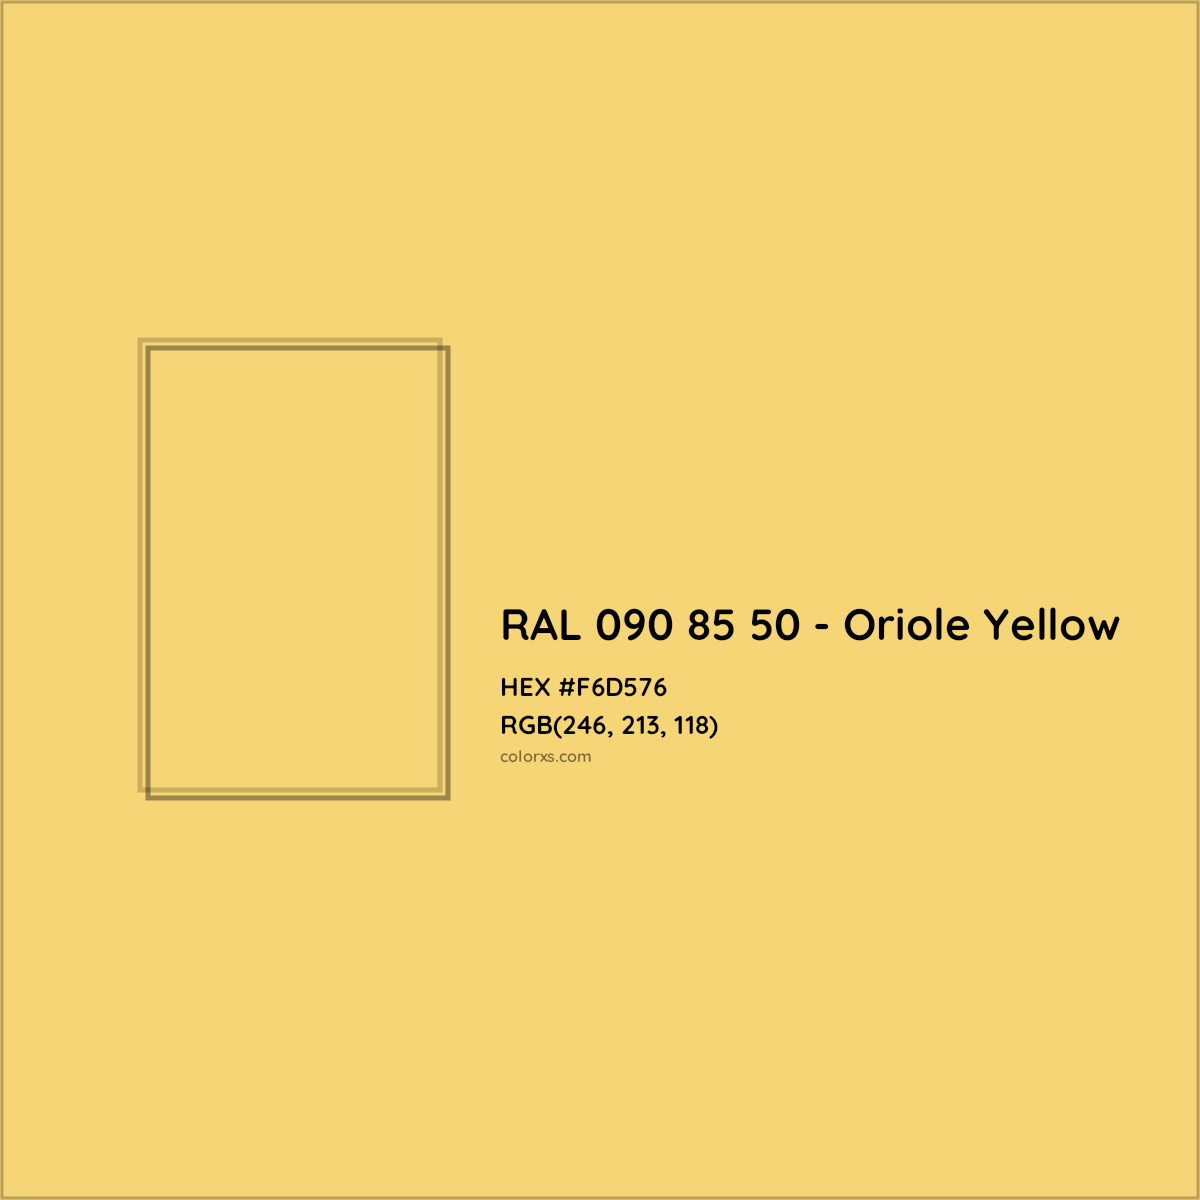 HEX #F6D576 RAL 090 85 50 - Oriole Yellow CMS RAL Design - Color Code